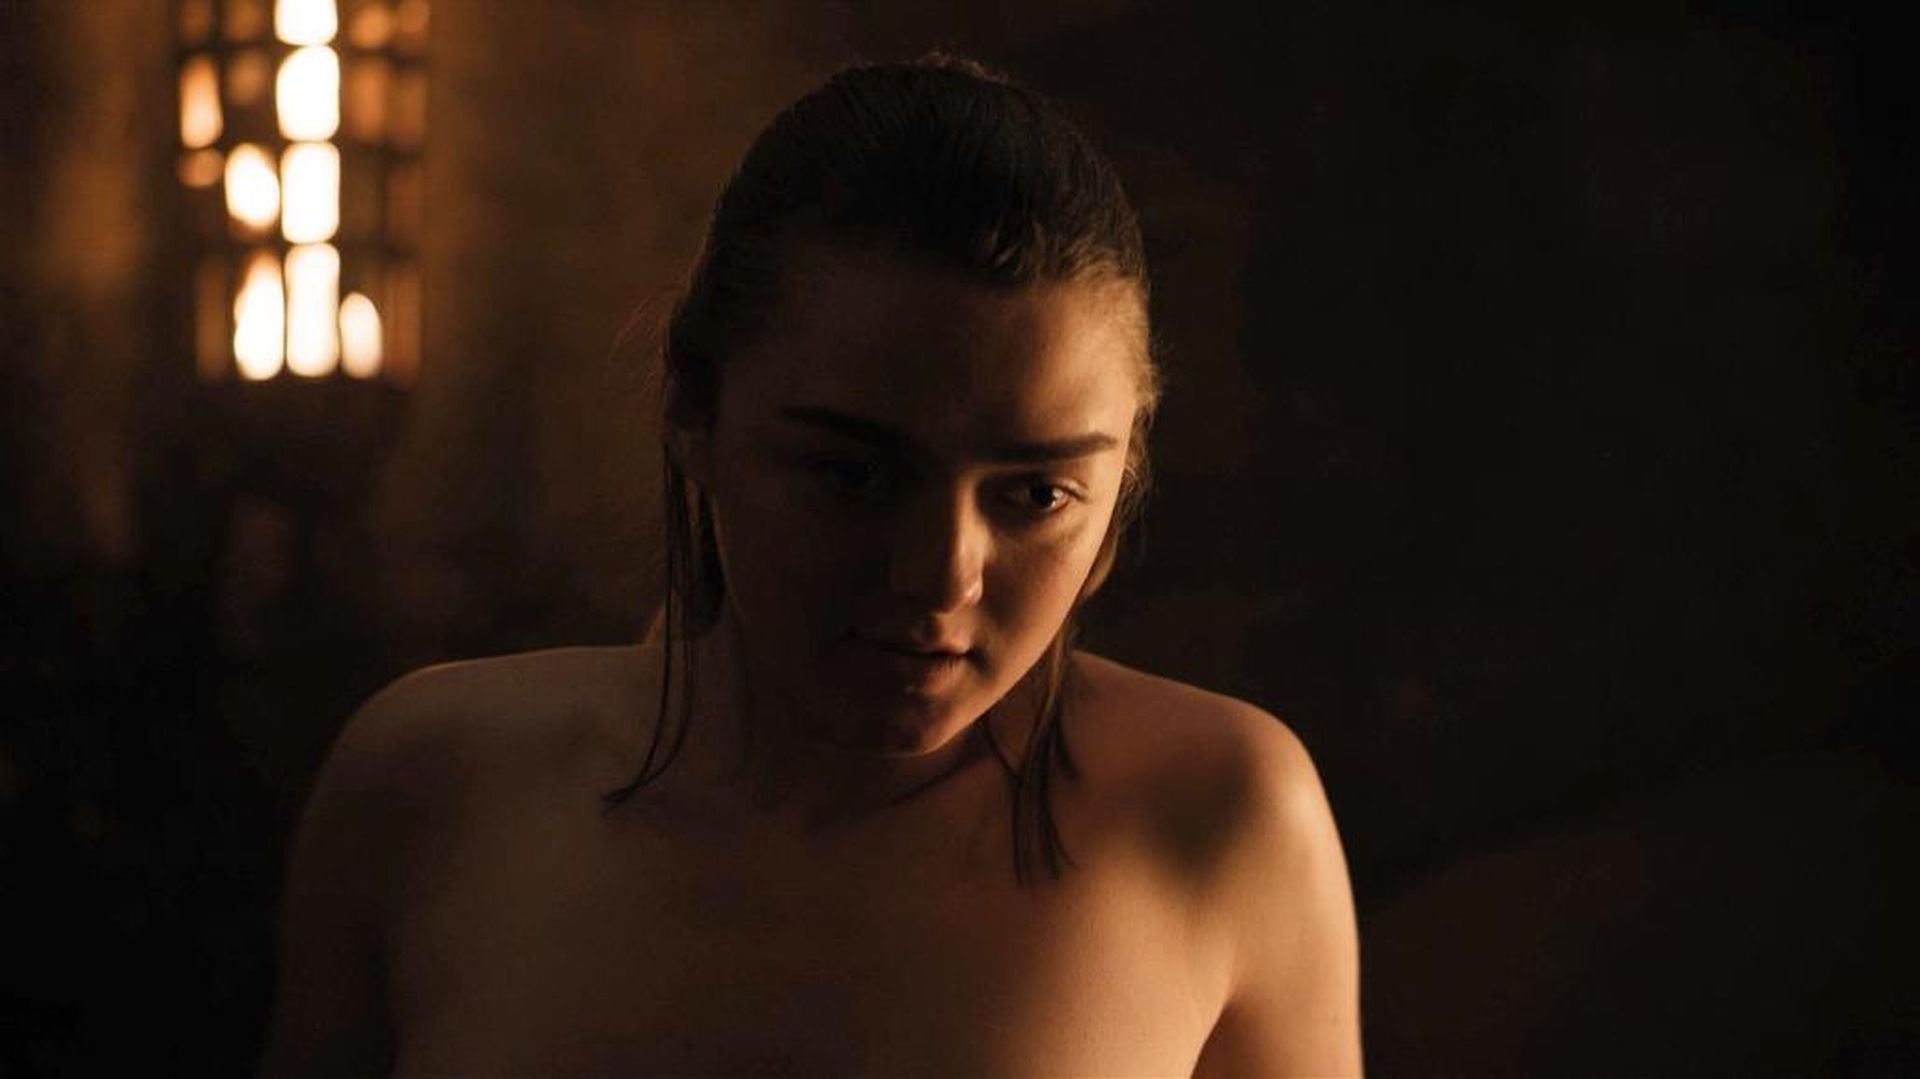 Maisie Williams Nude - Game of Thrones (10 Pics + GIFs & Video)